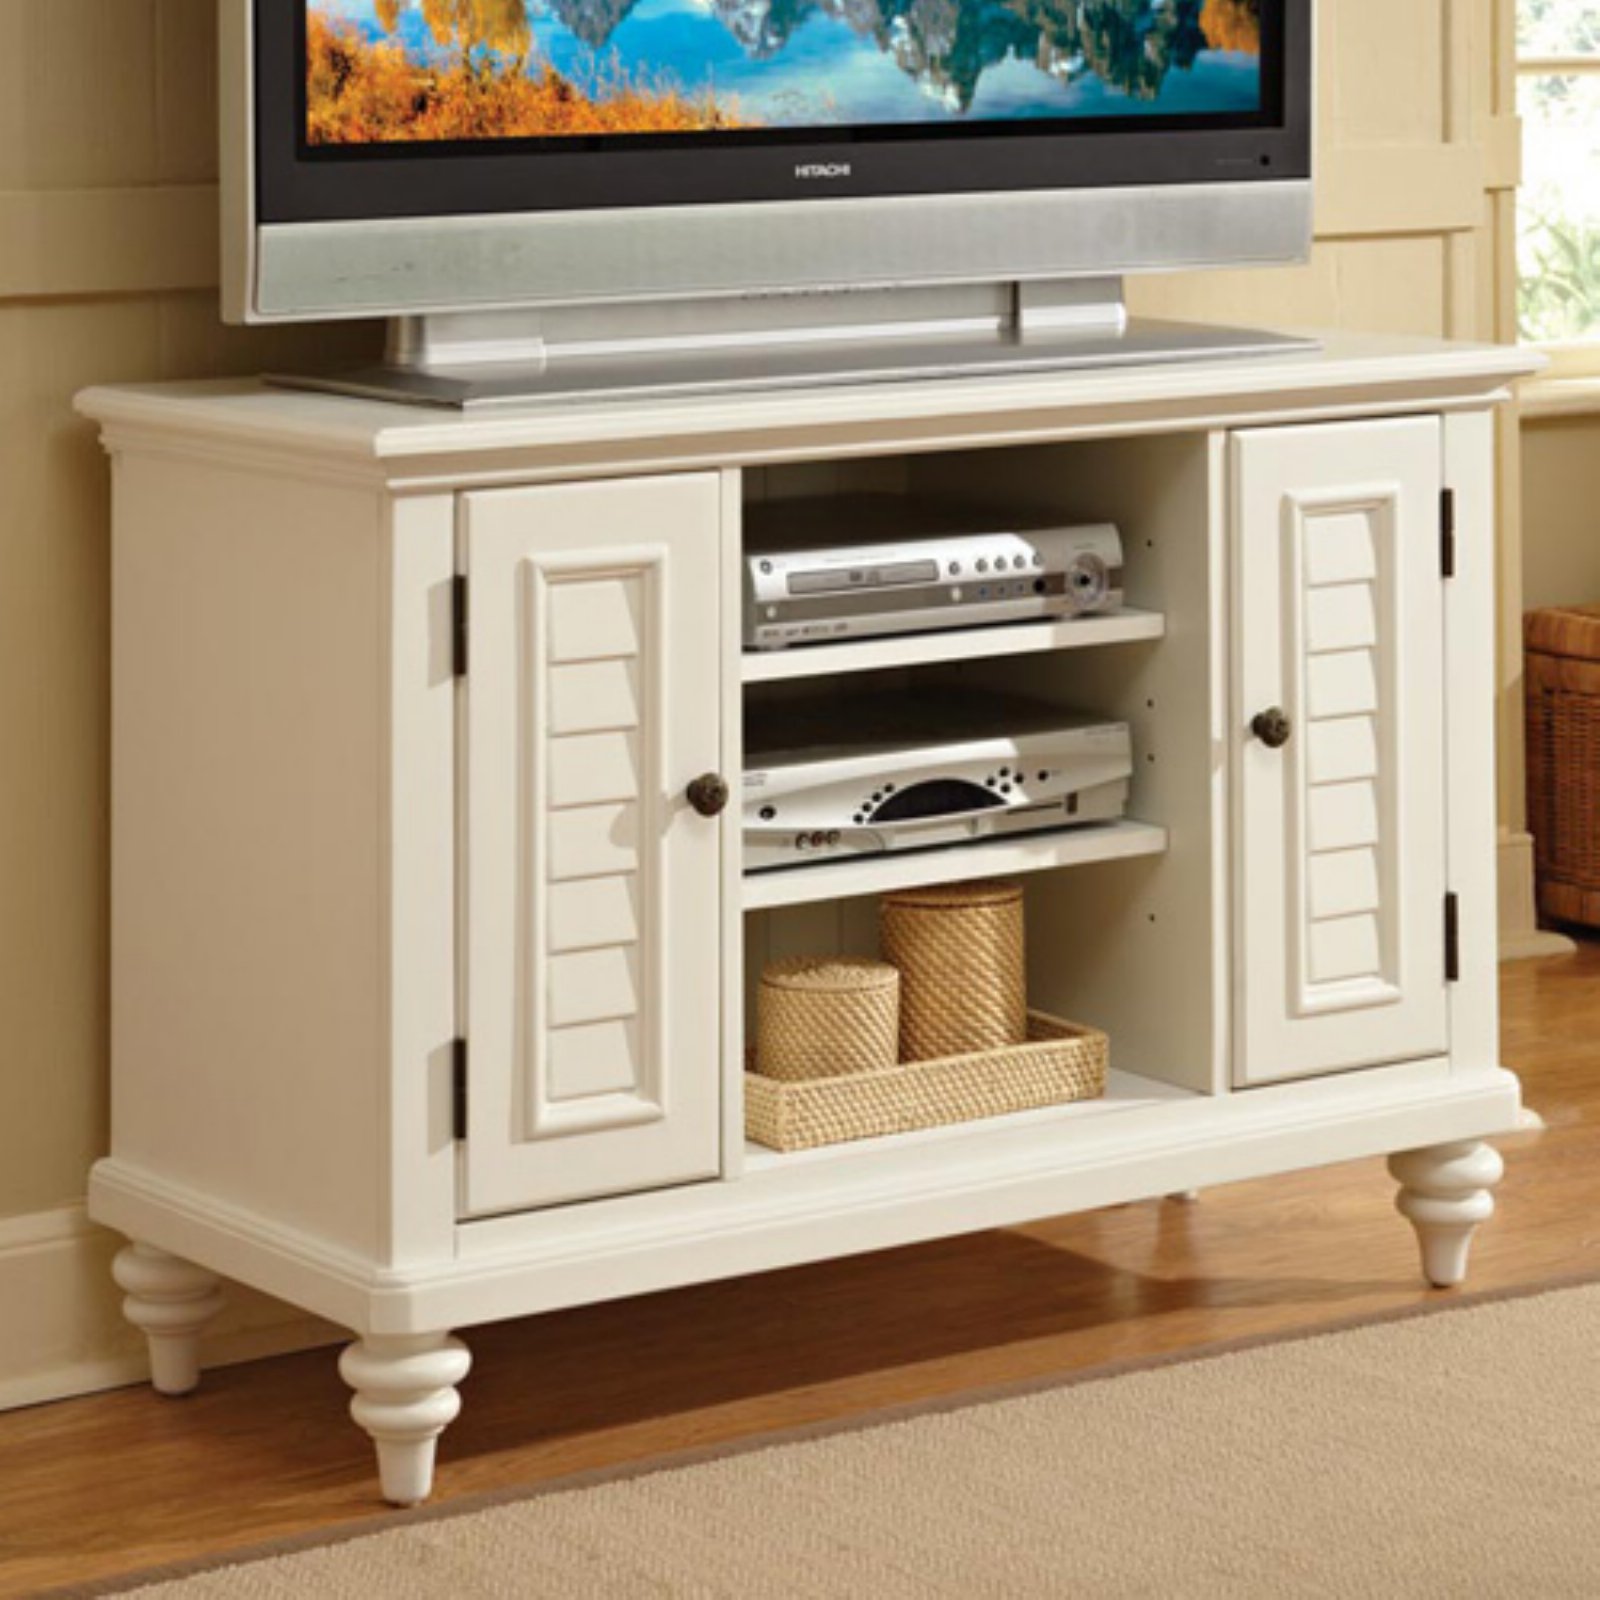 Home Styles Bermuda Brushed White TV Stand - image 1 of 2